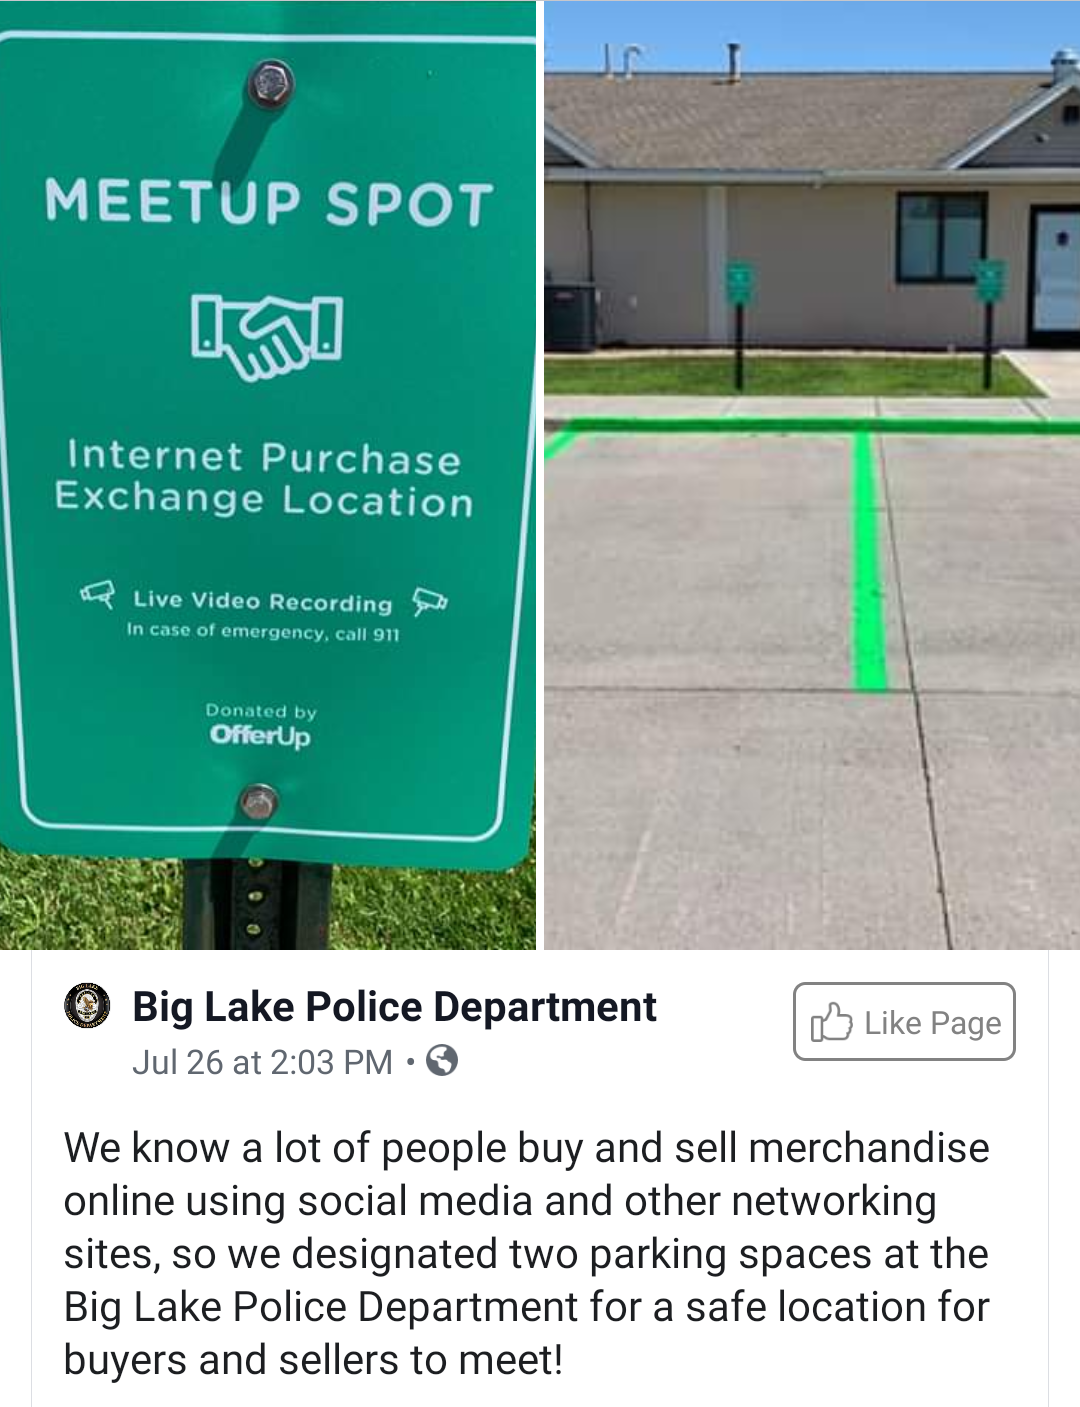 grass - Meetup Spot Internet Purchase Exchange Location Live Video Recording Sa in ne of woney, call on Ollerup Big Lake Police Department Jul 26 at Page We know a lot of people buy and sell merchandise online using social media and other networking sites